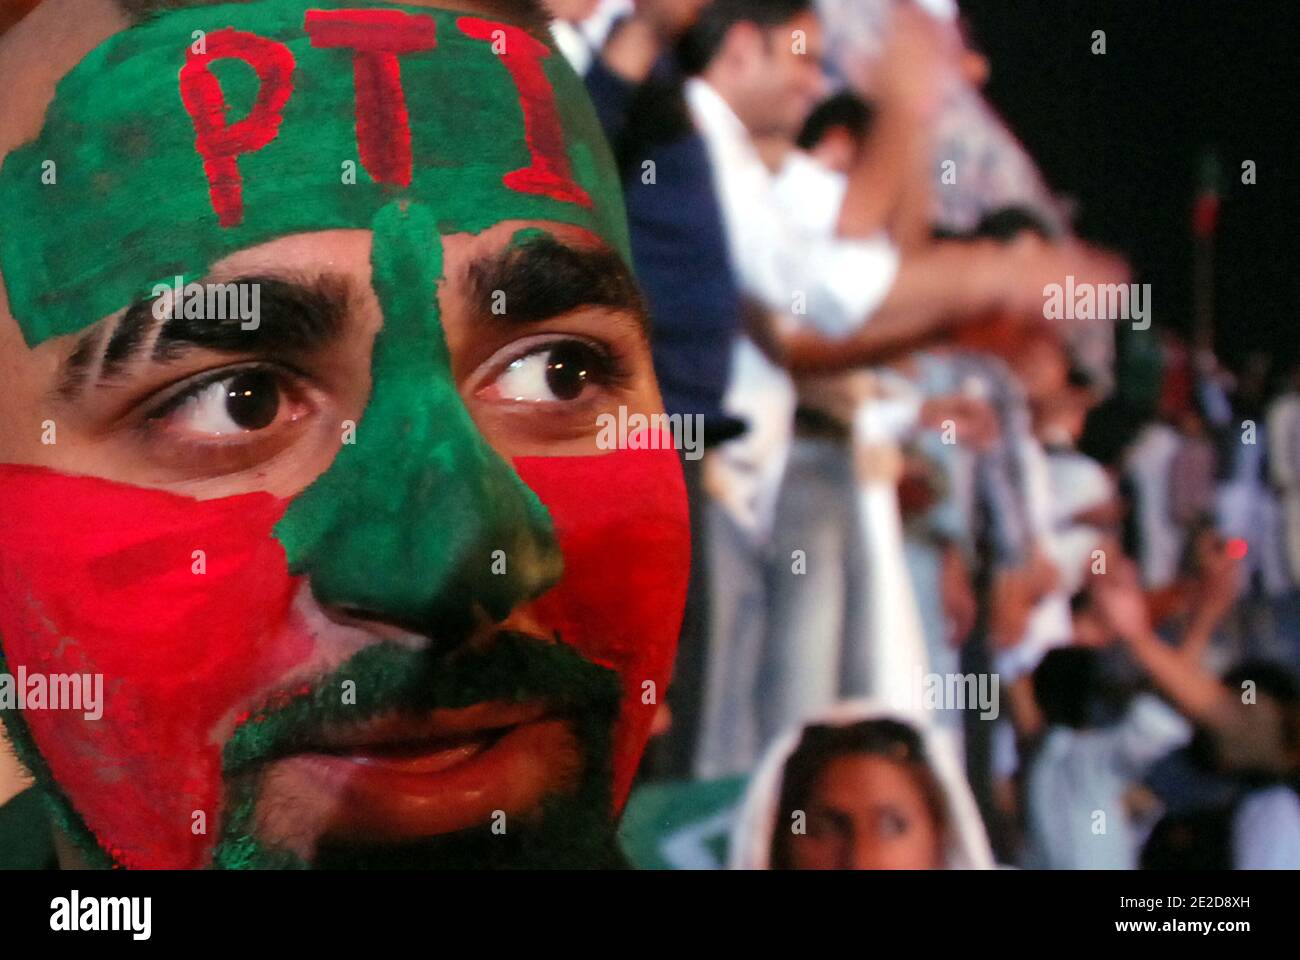 Supporter of Pakistani politician and former cricketer Imran Khan participates in a rally in Lahore, Pakistan on October 30, 2011. A crowd of thousands gathered called by Khan to press President Asif Ali Zardari to step down. The rally, seen as a show of strength, comes two days after Sharif's brother Shahbaz, attracted some 30,000 people at an anti-Zardari protest also in the key political battleground of Lahore. Photo by Irfan/ABACAPRESS.COM Stock Photo